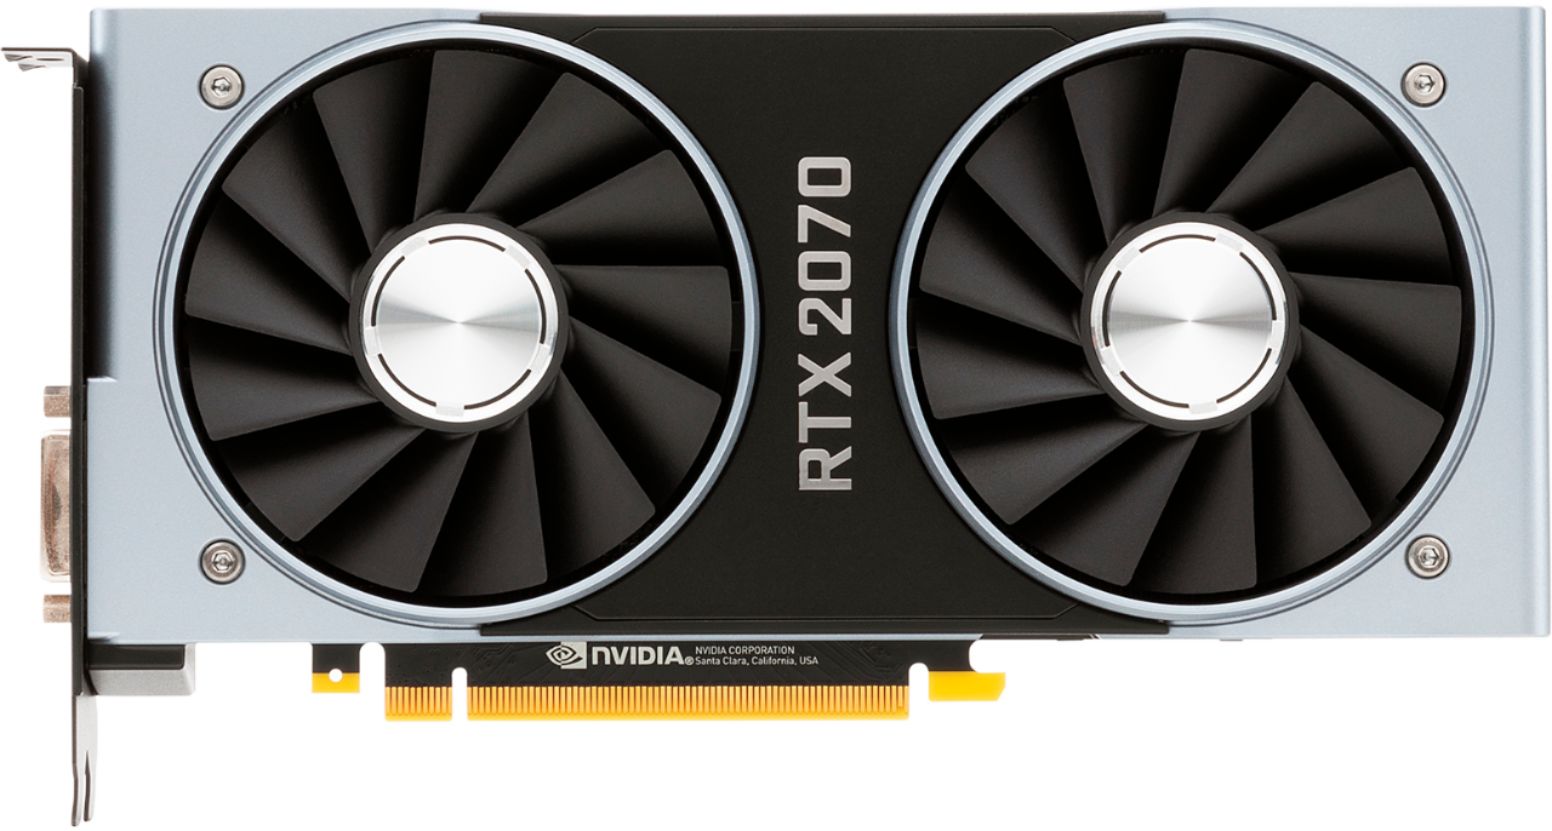 NVIDIA GeForce RTX 2070 Founders Edition GDDR6 PCI Express 3.1 Card 9001G1602550000 - Best Buy